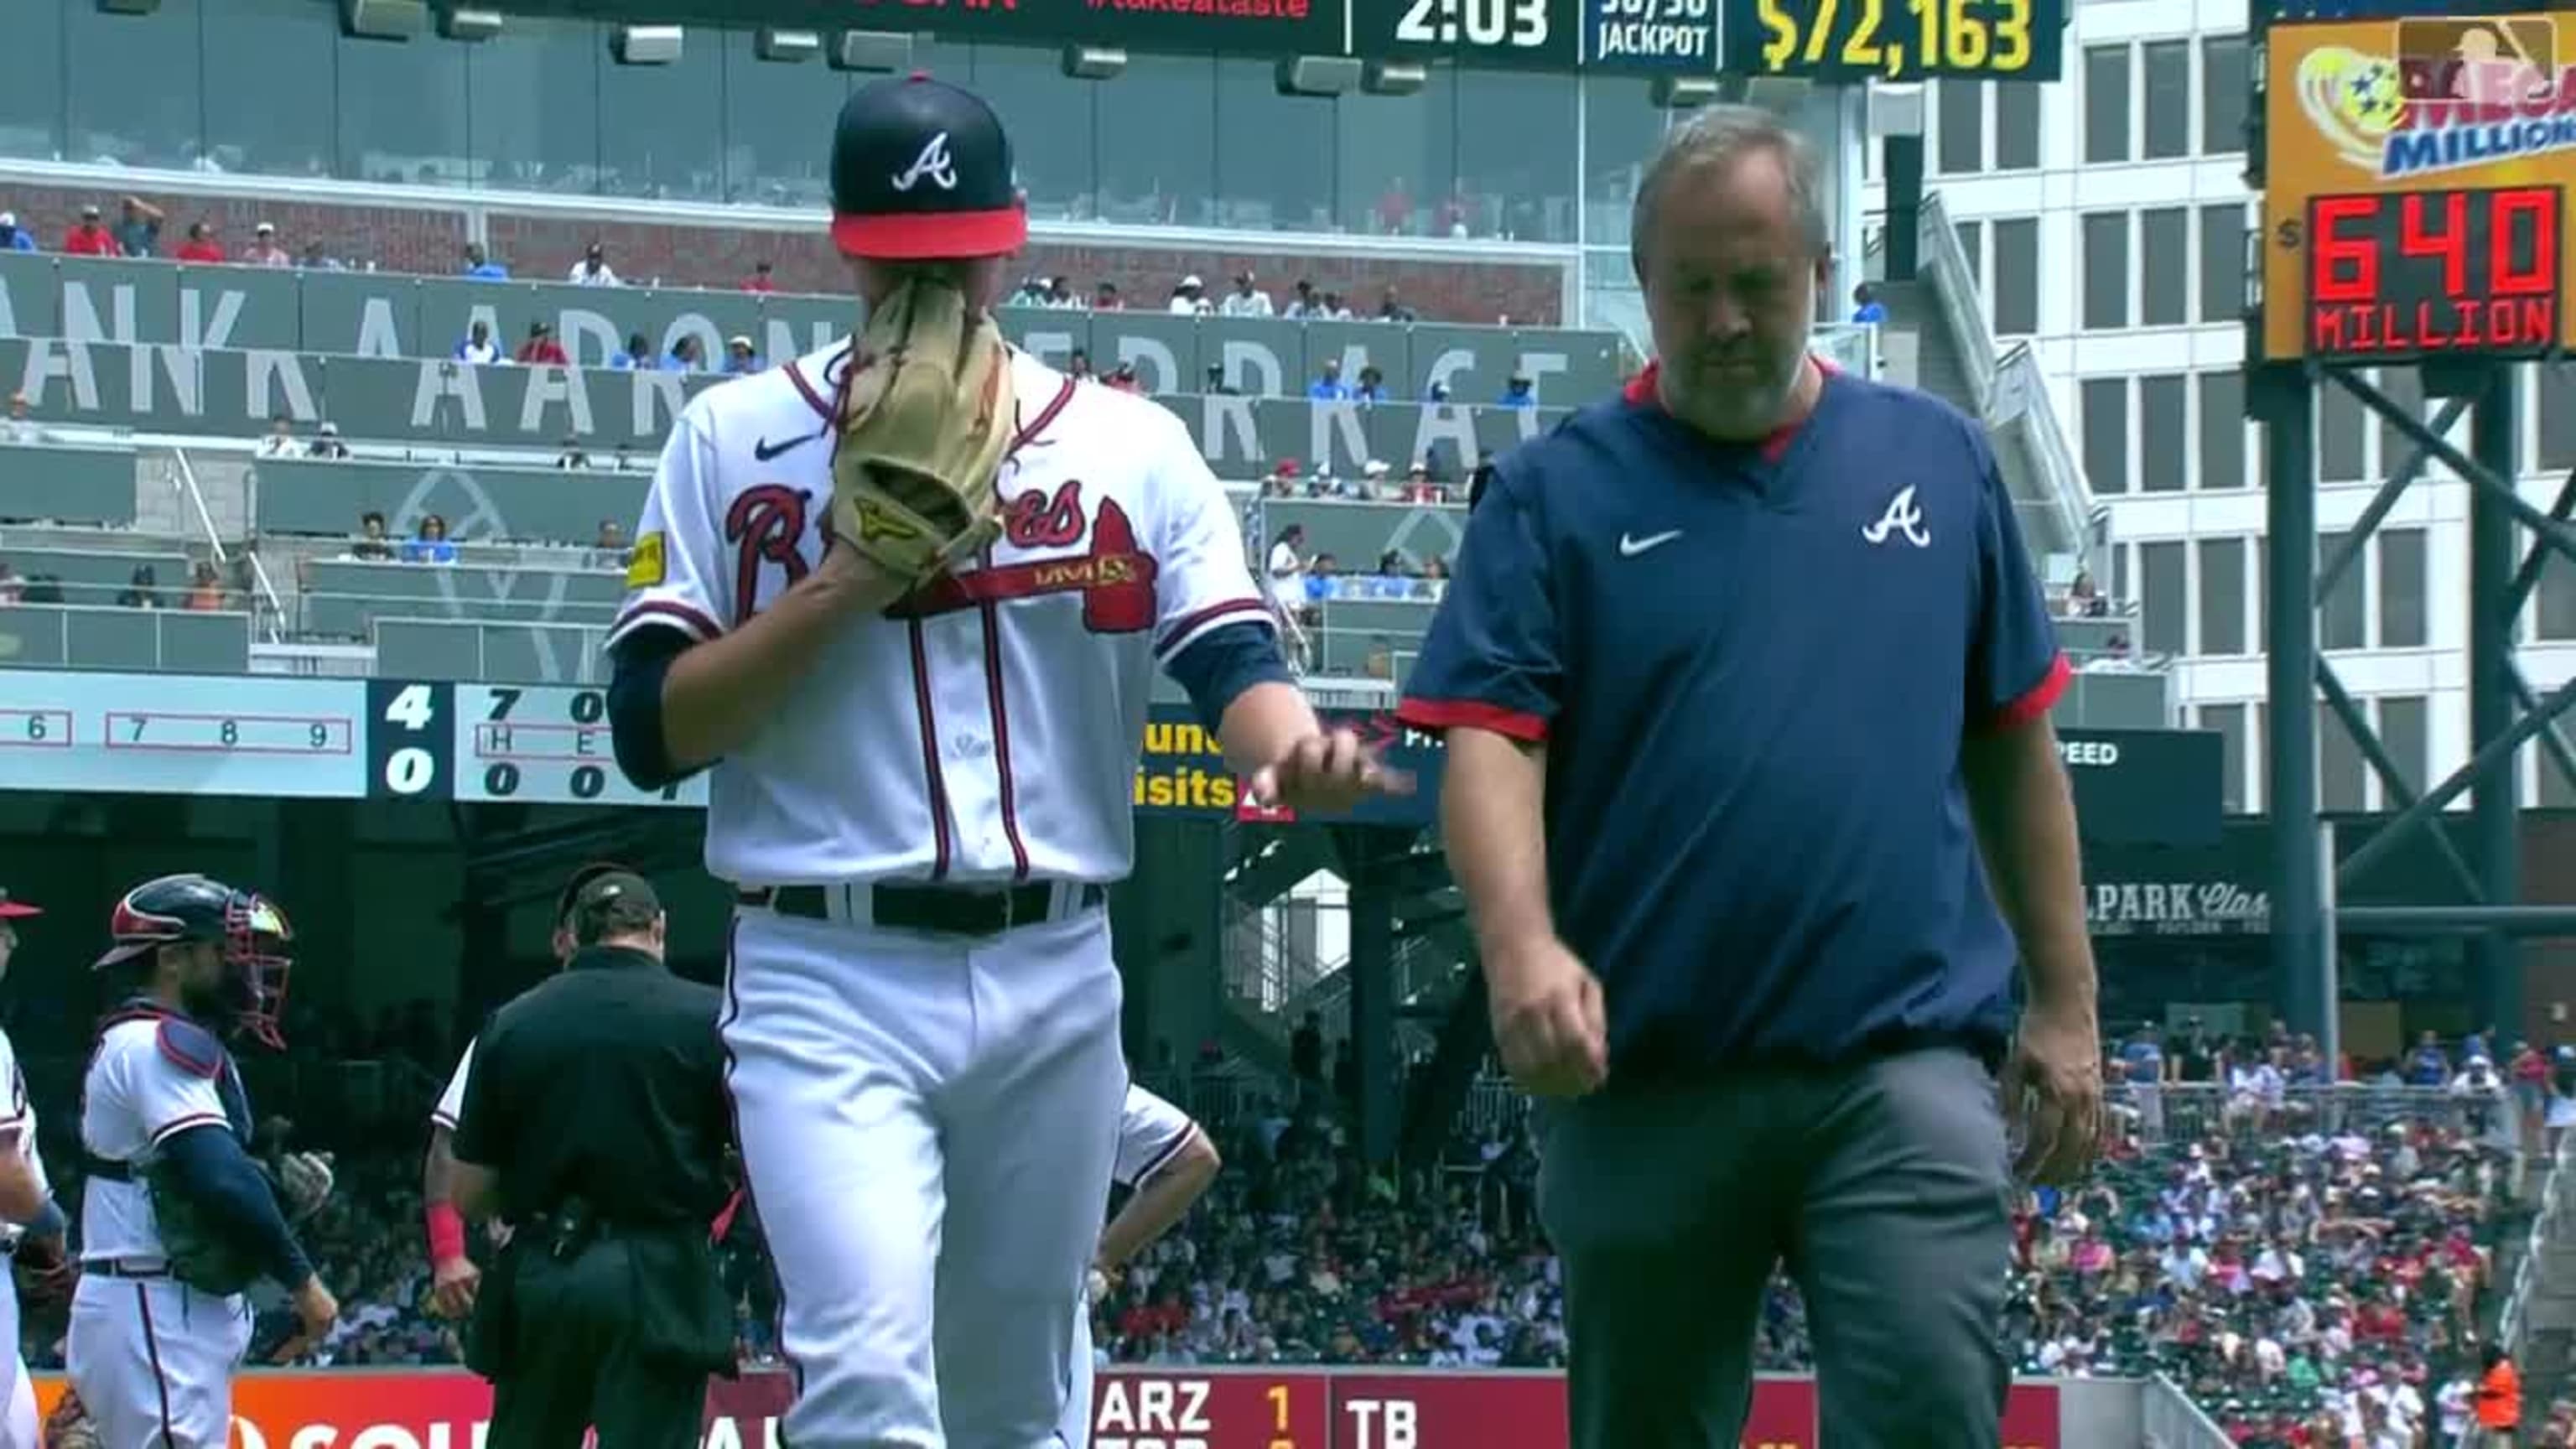 Braves place Gattis on disabled list with back injury